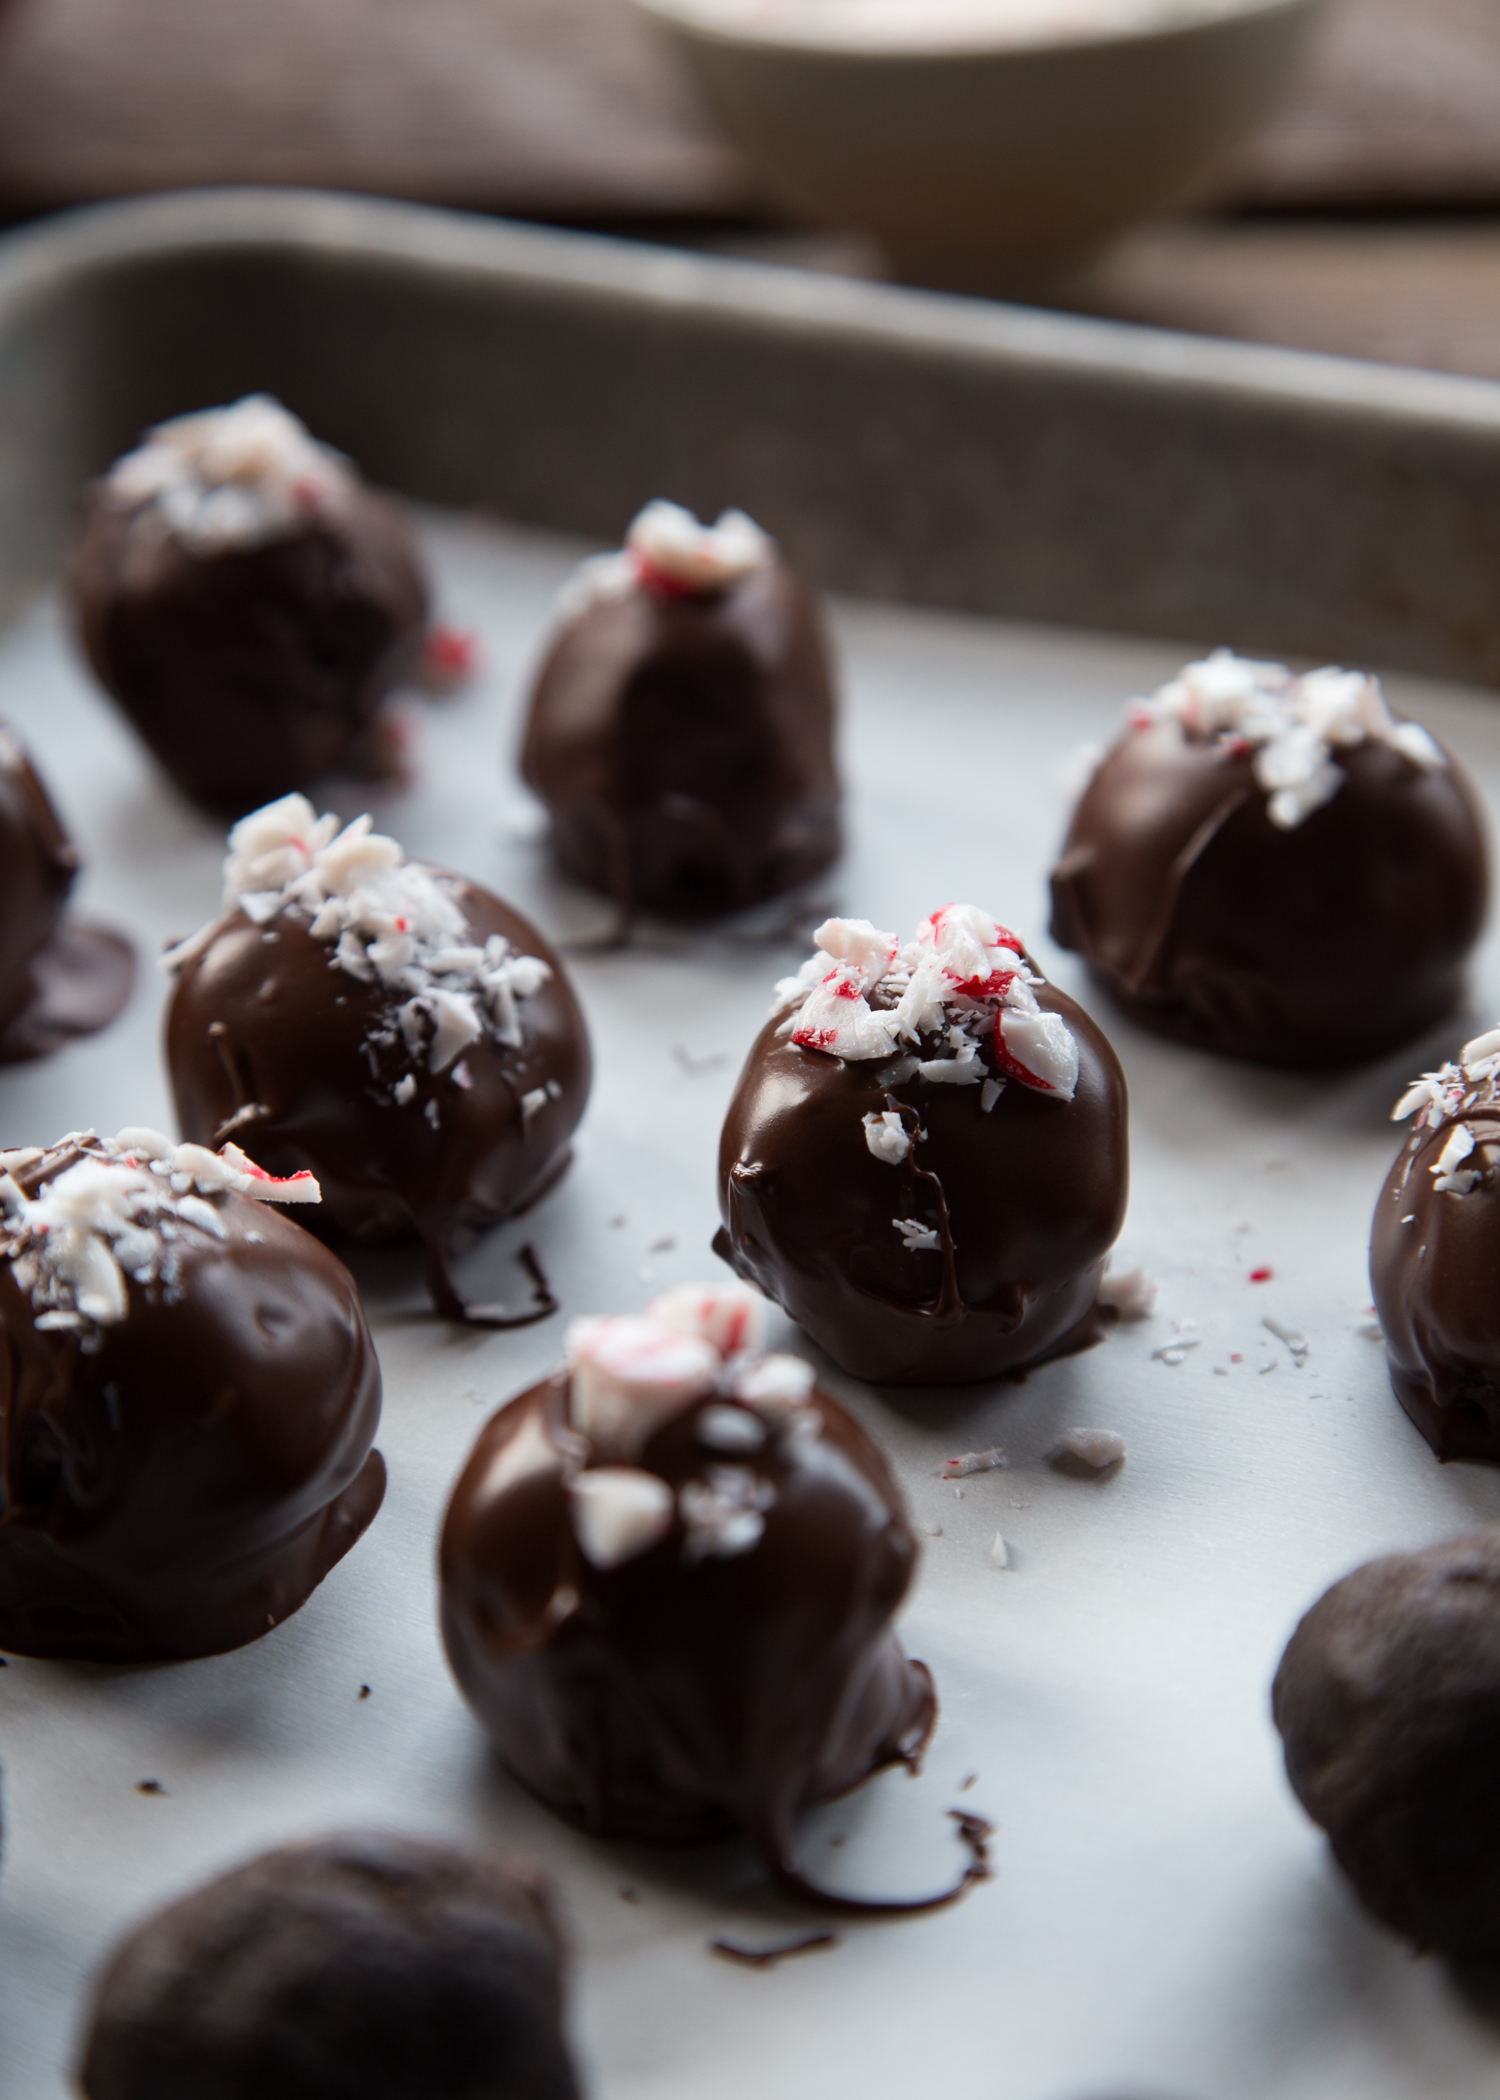 These Peppermint OREO Cookie Balls are dipped in chocolate and sprinkled with crushed Starlight mints. Yum!